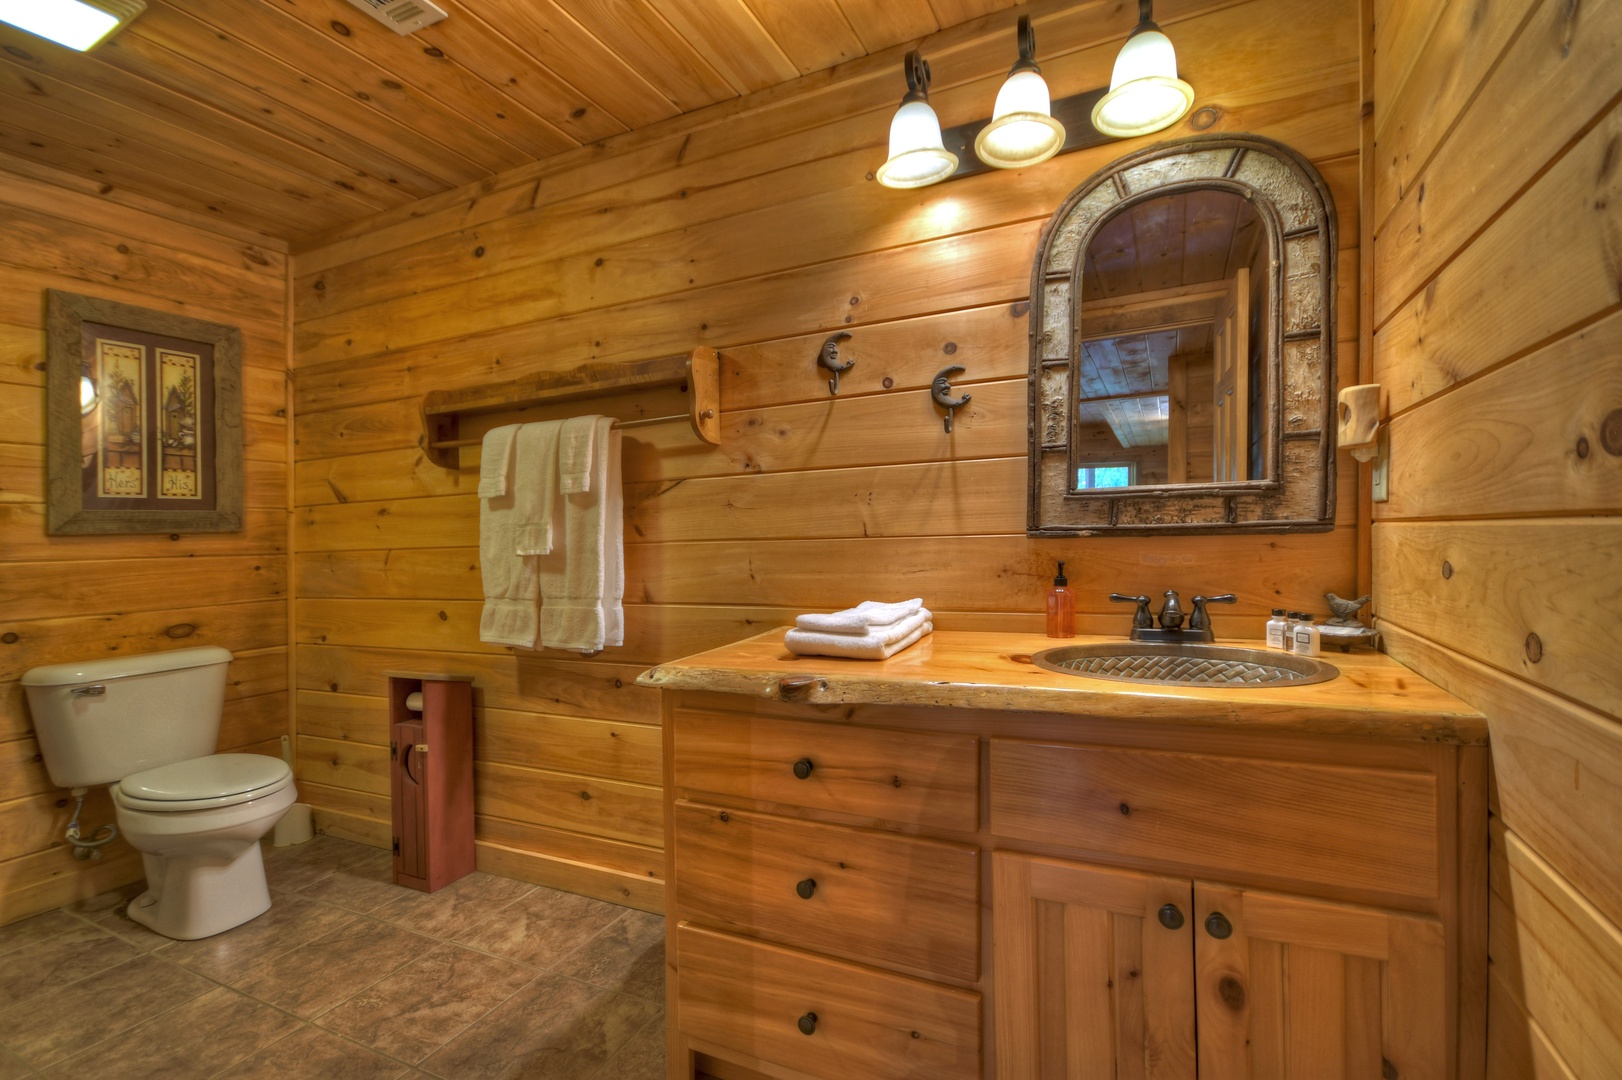 Aska Lodge-Lower level full bathroom with a single vanity and toilet